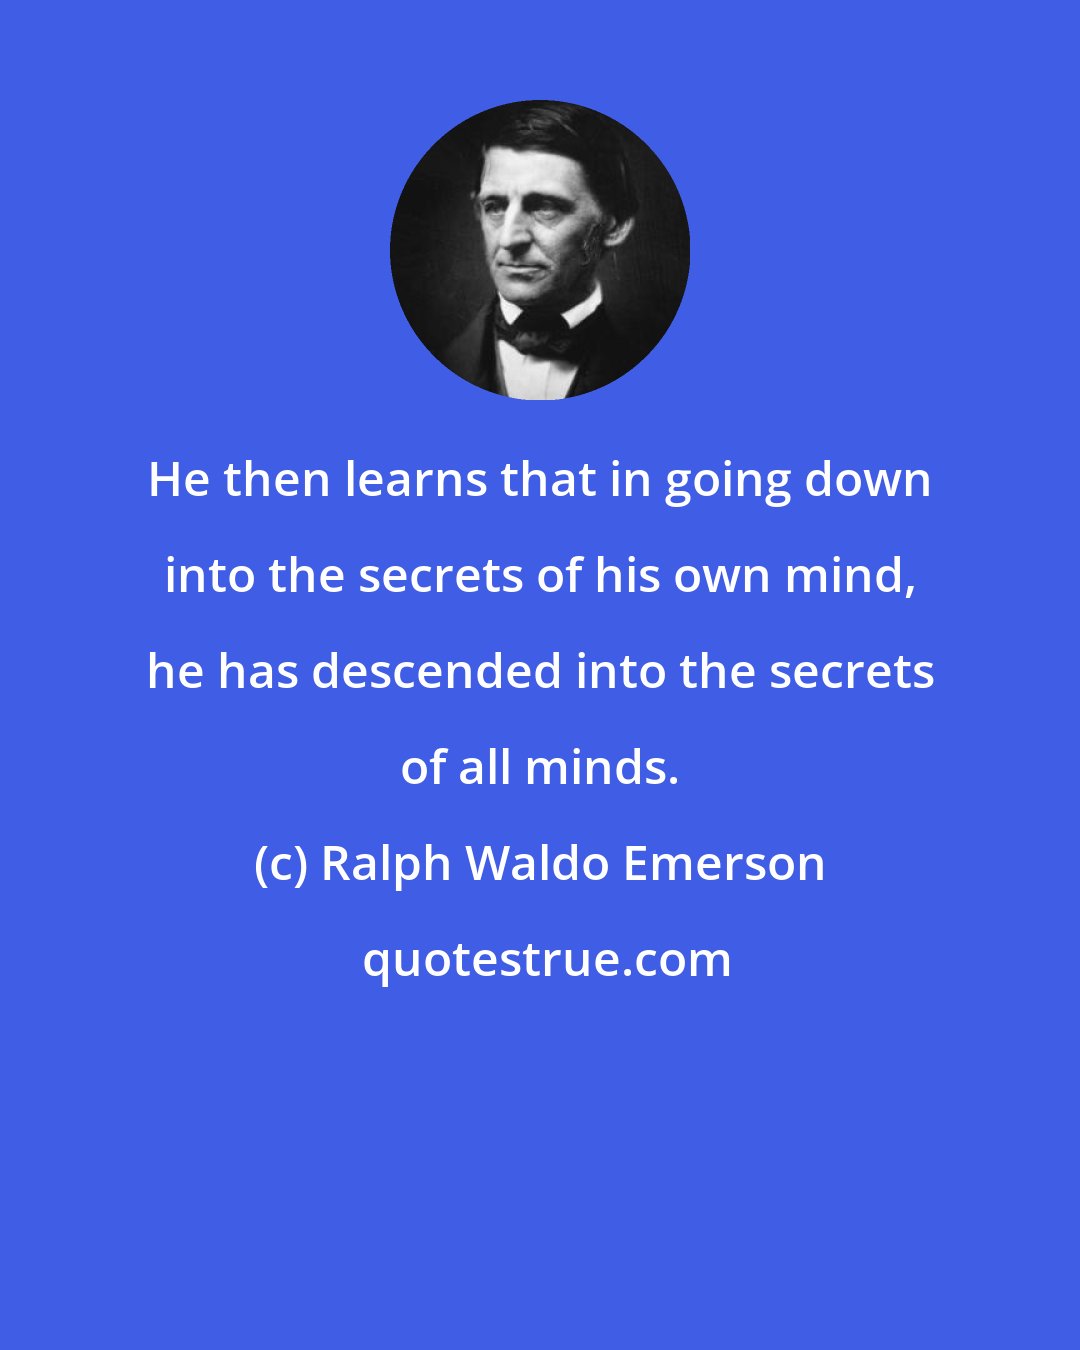 Ralph Waldo Emerson: He then learns that in going down into the secrets of his own mind, he has descended into the secrets of all minds.